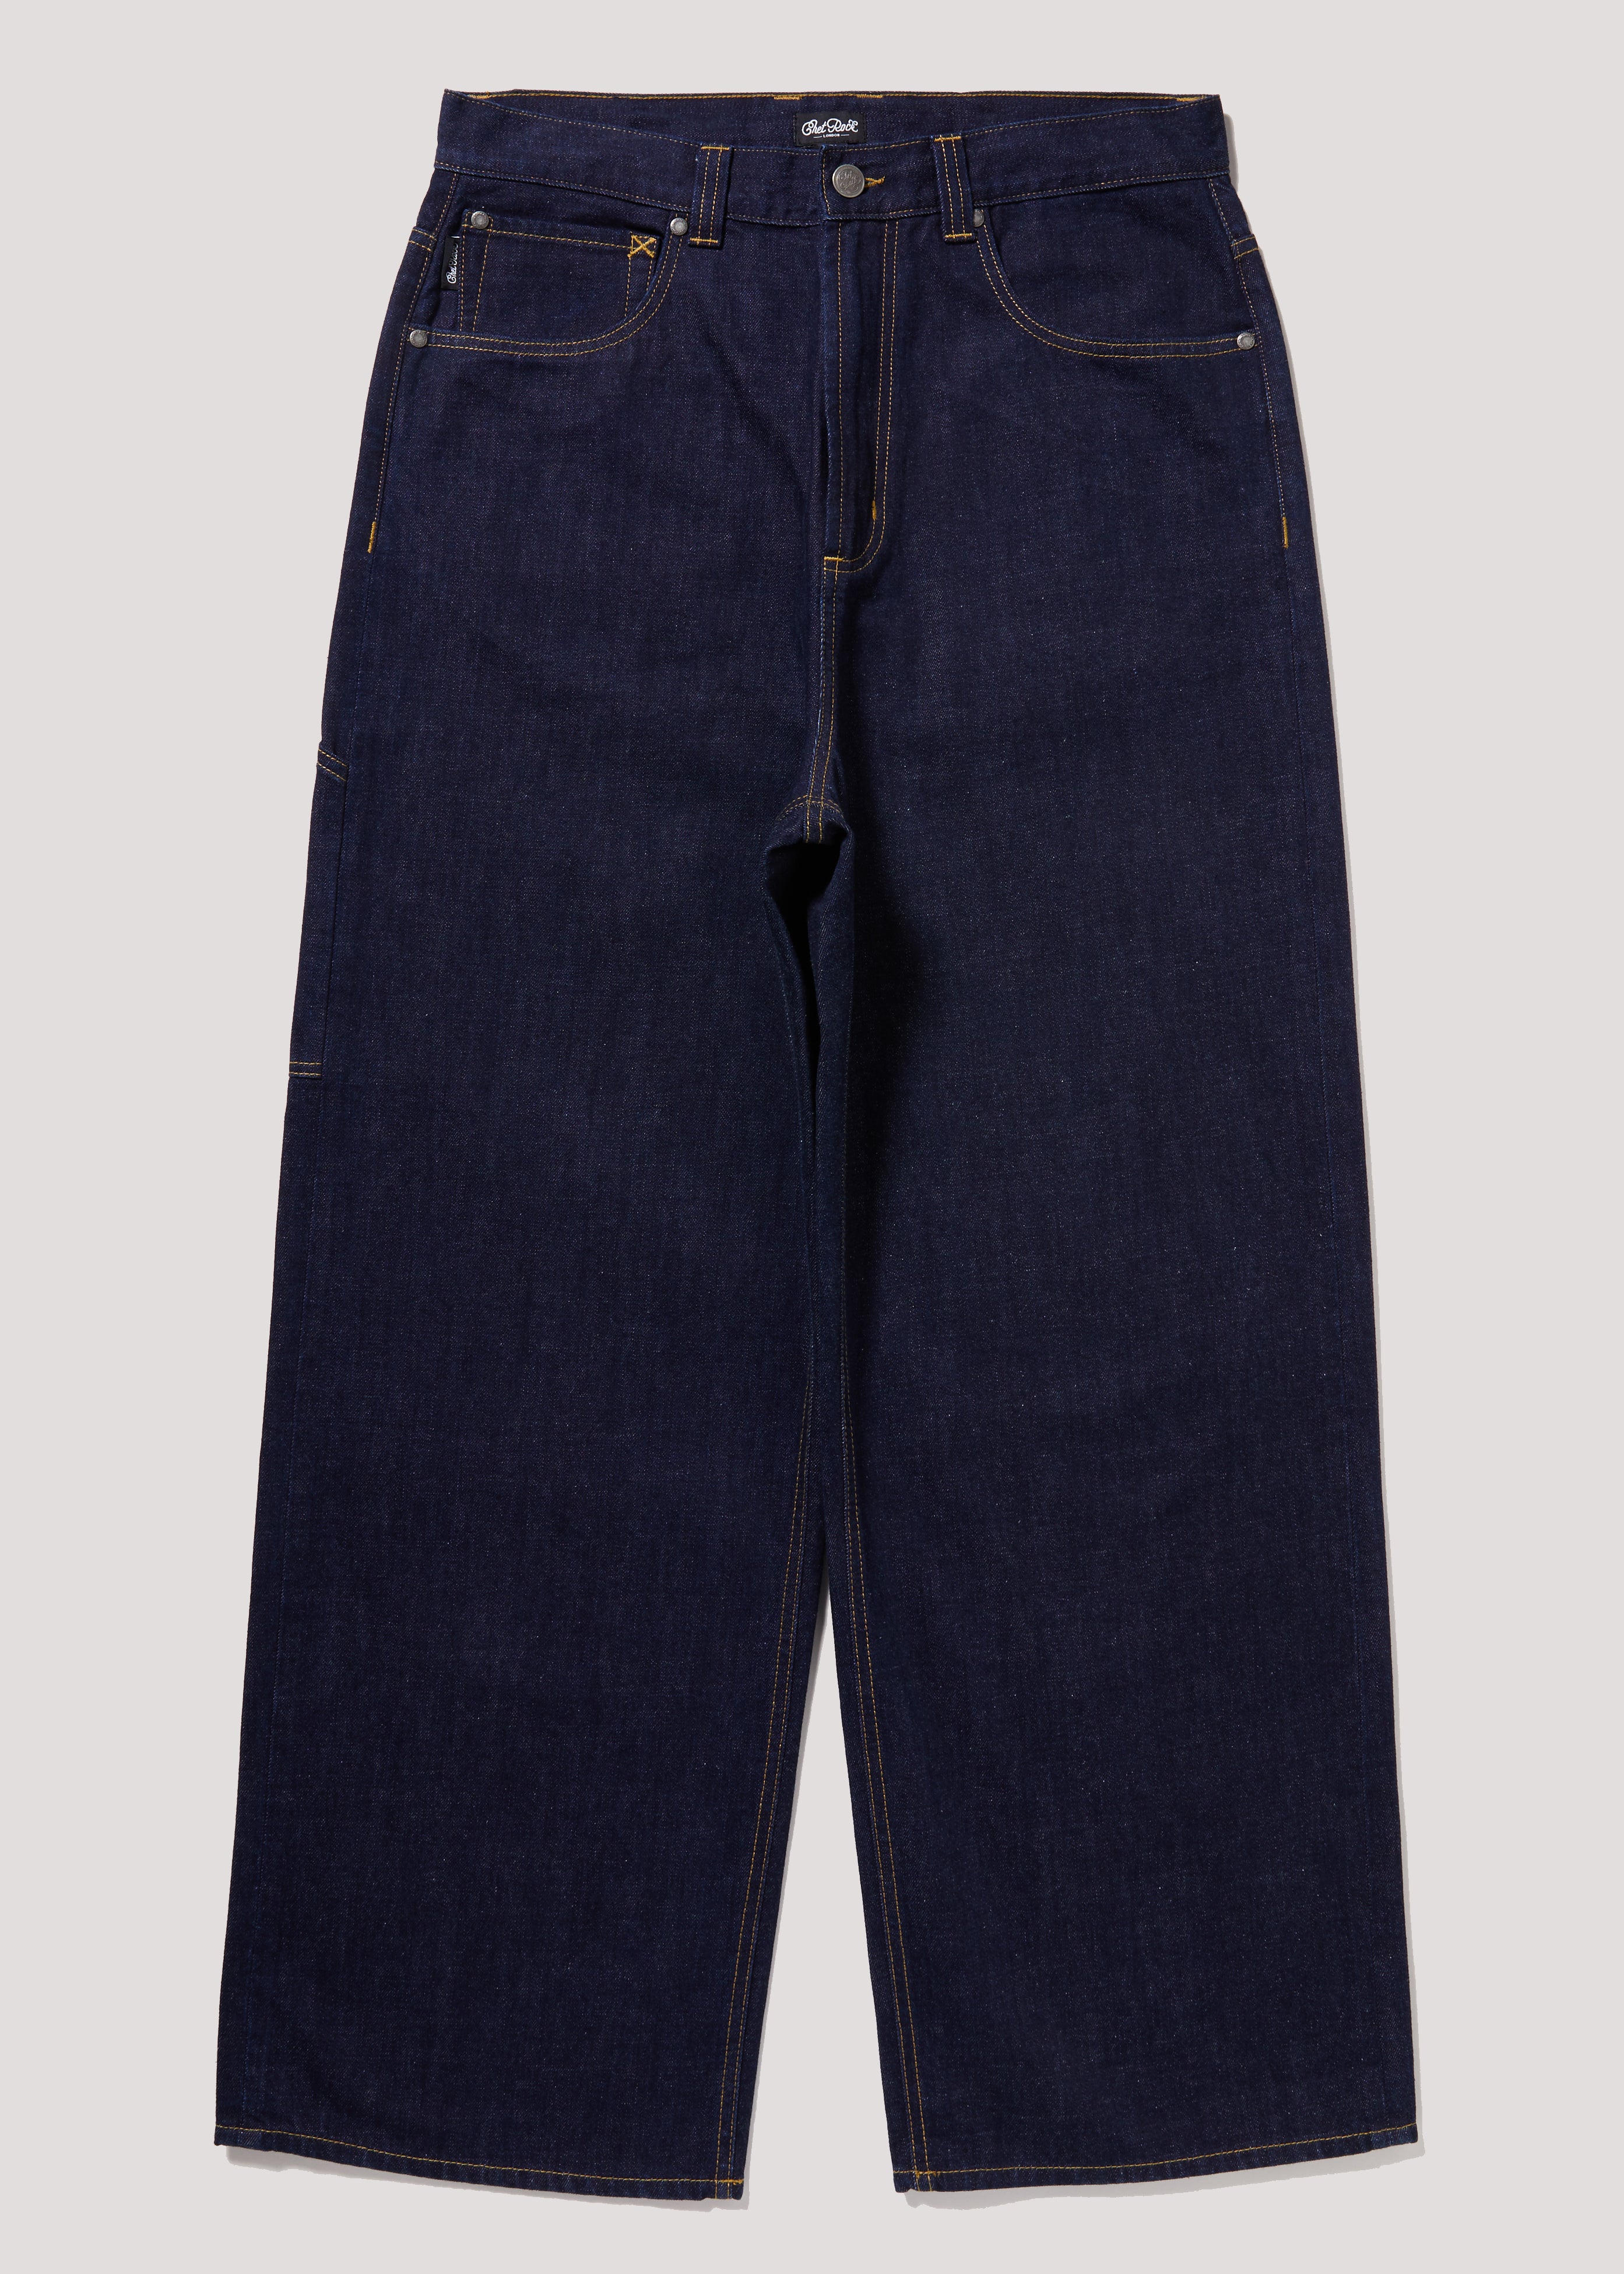 Slouch Jeans - Rinse